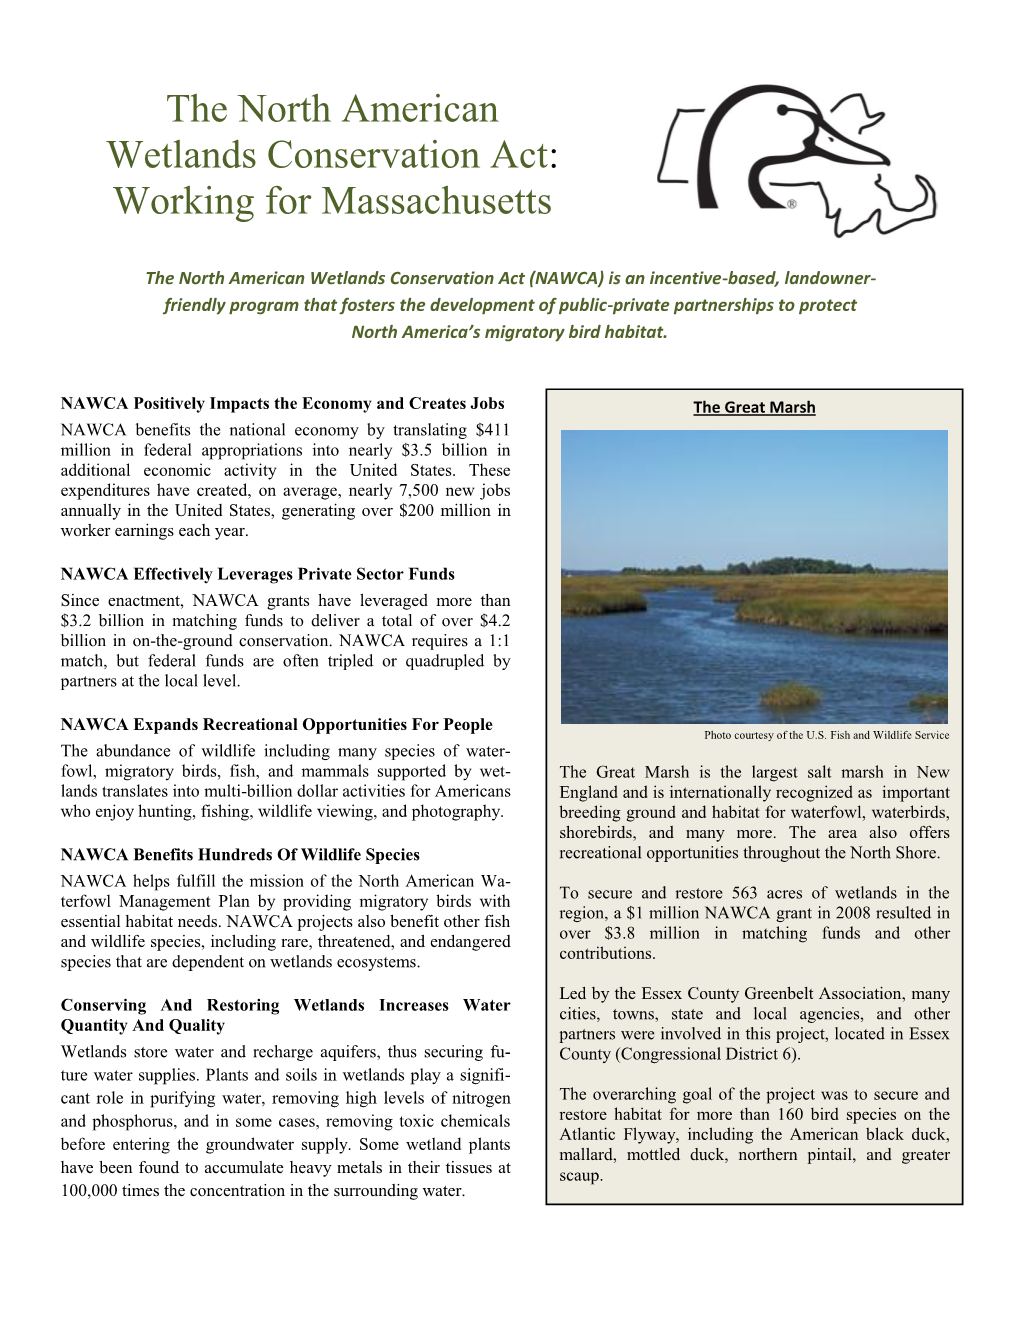 The North American Wetlands Conservation Act: Working for Massachusetts